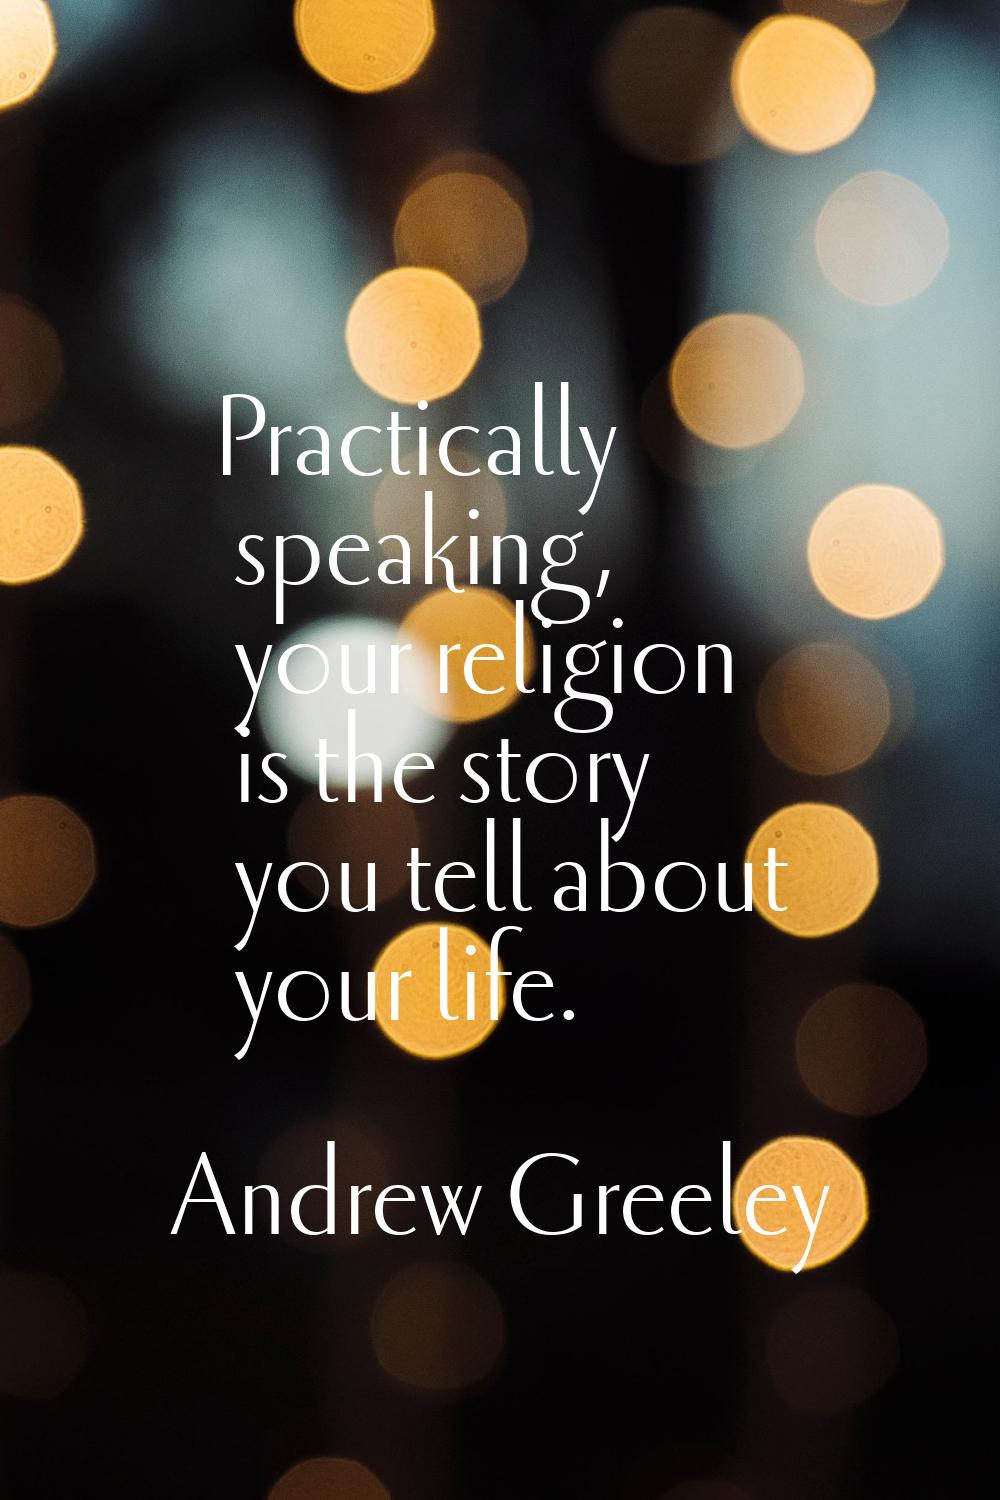 Practically speaking, your religion is the story you tell about your life.